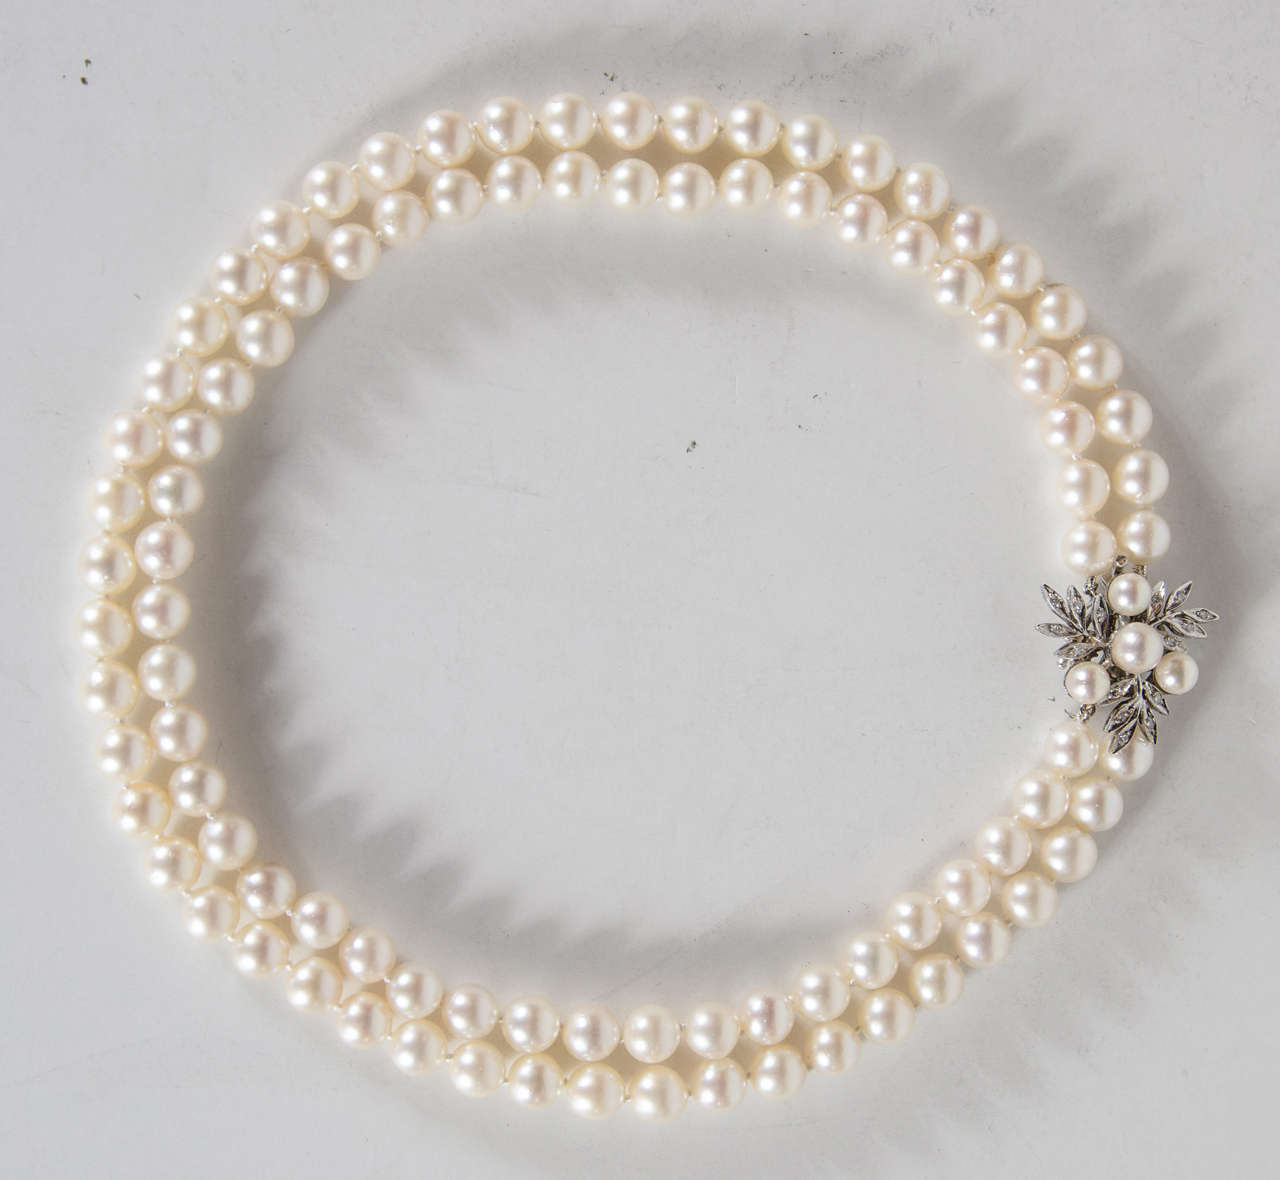 This beautifully matched double strand of Pearls feature 6.5 millimeter pearls in a lustrous creamy white. The clasp is 14k white gold set with diamonds and 4 pearls in a stylized floral design.Thet have also just been restrung.